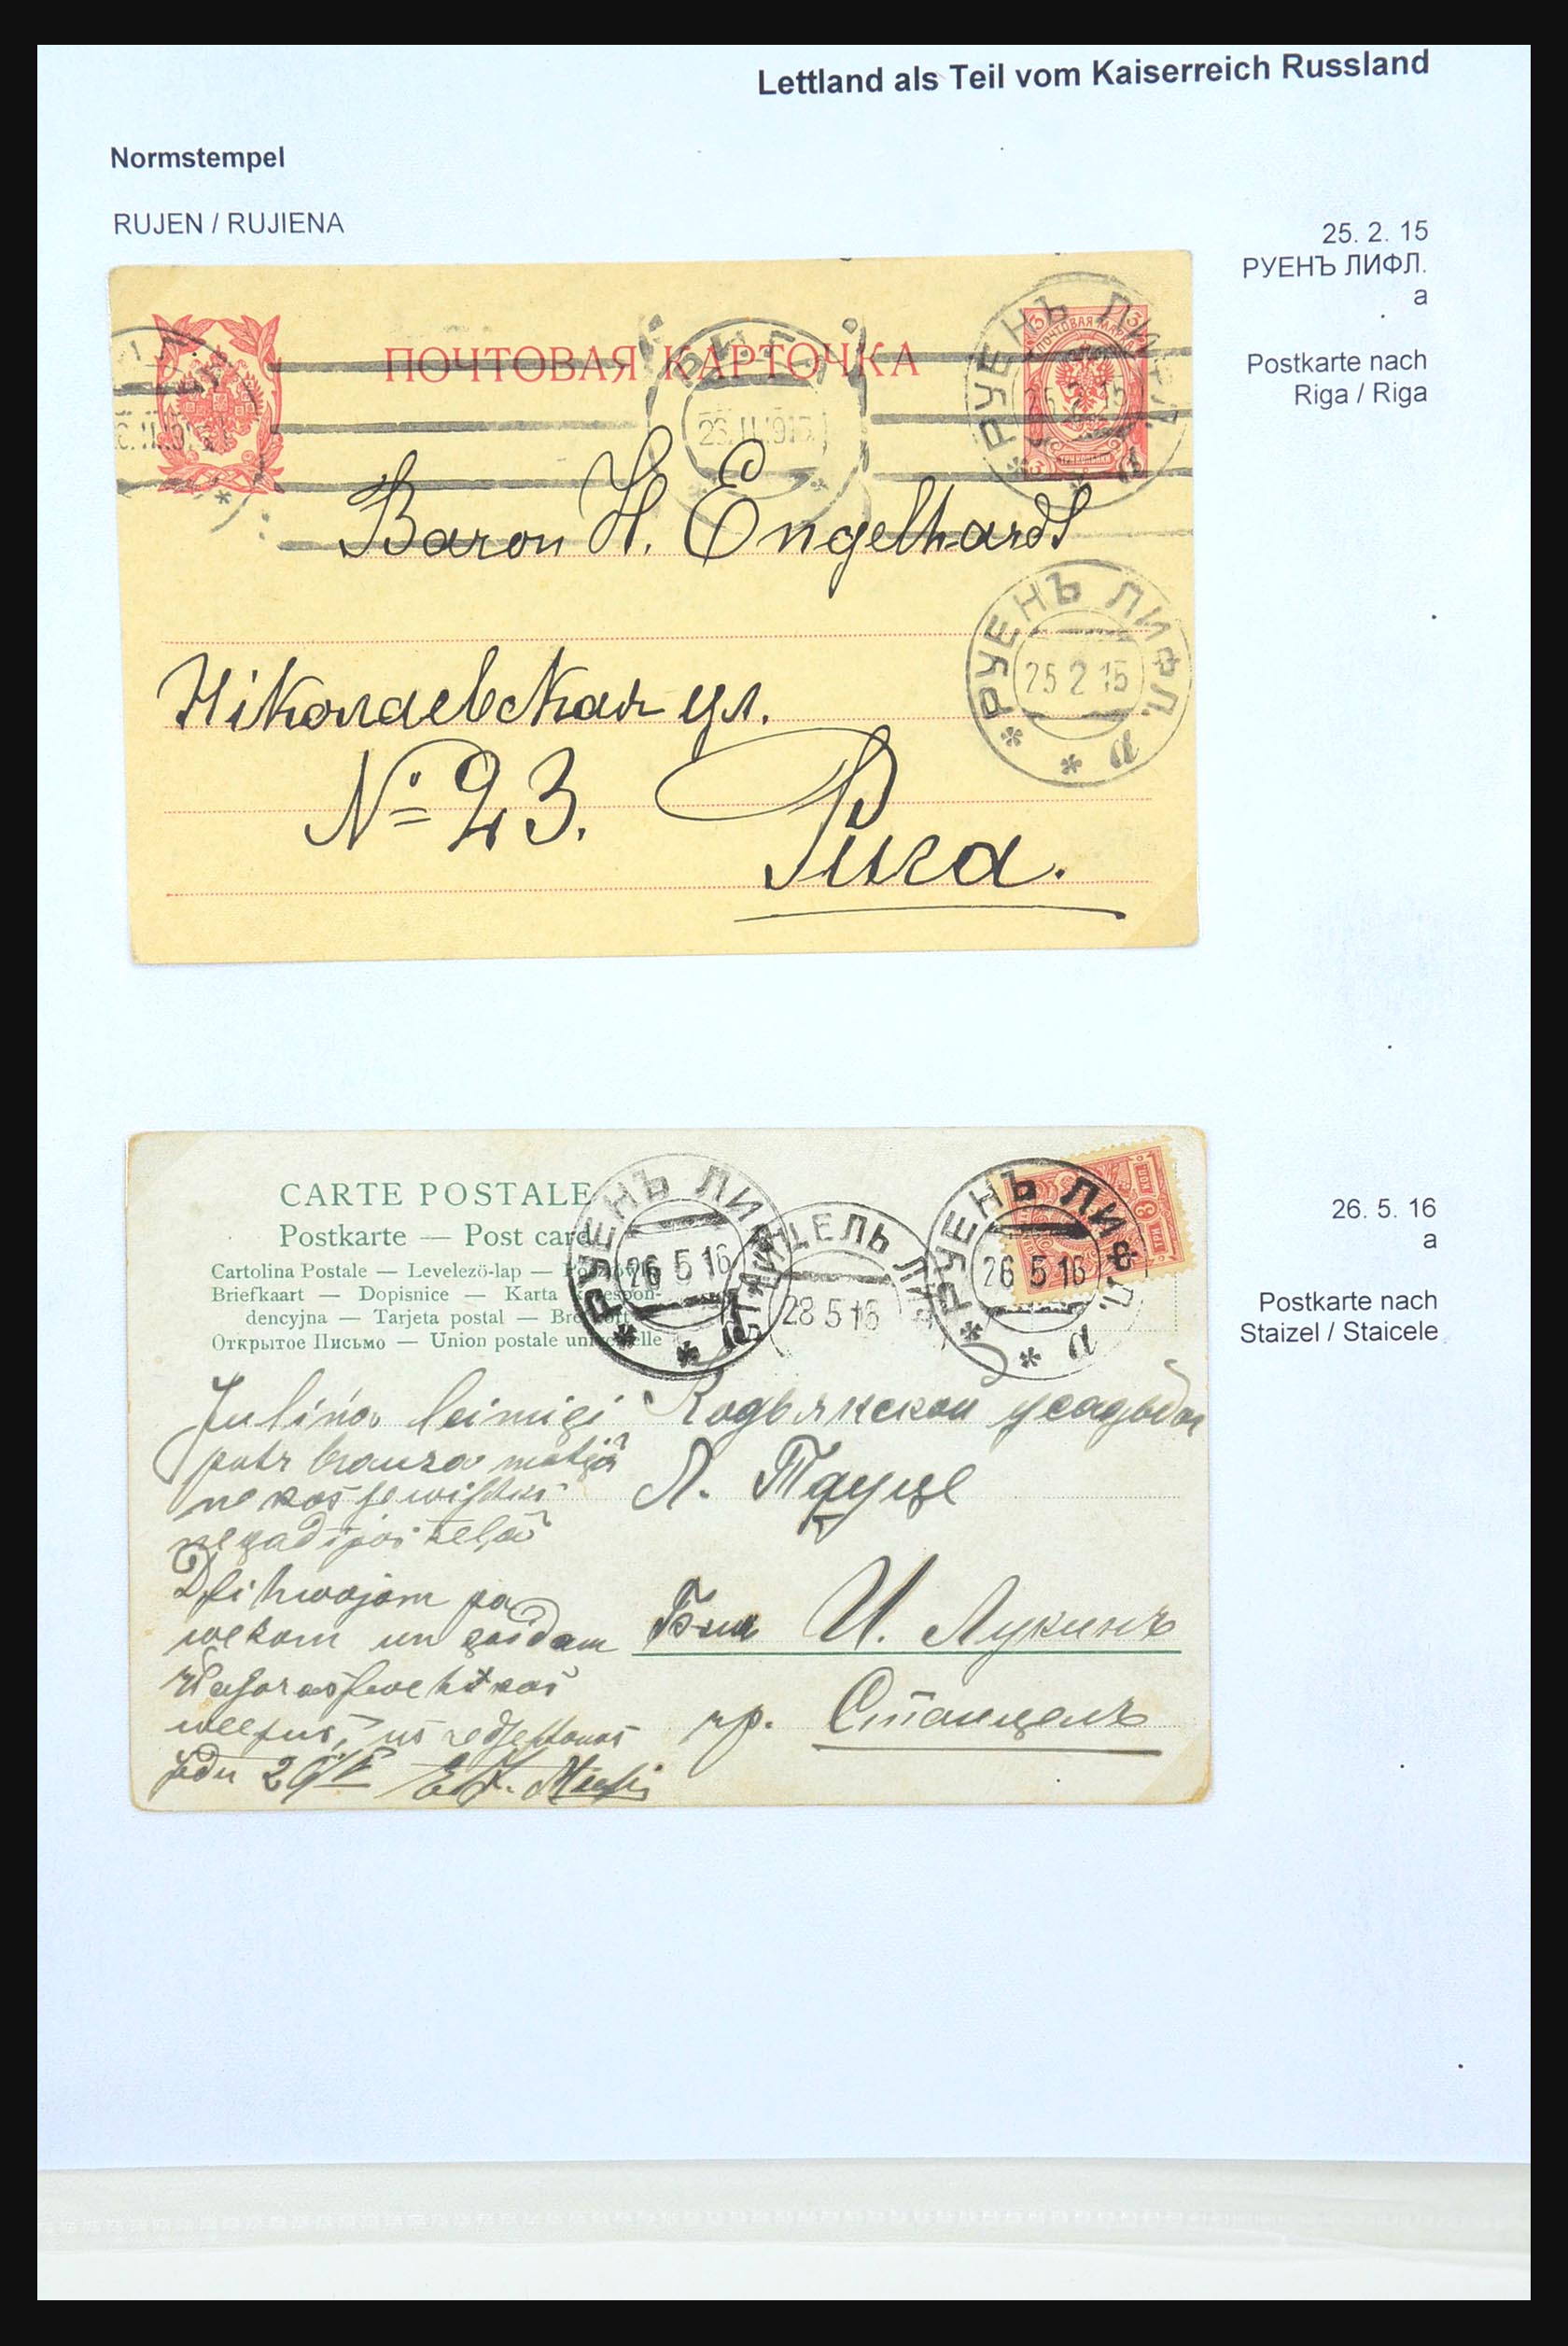 31305 106 - 31305 Latvia as part of Russia 1817-1918.